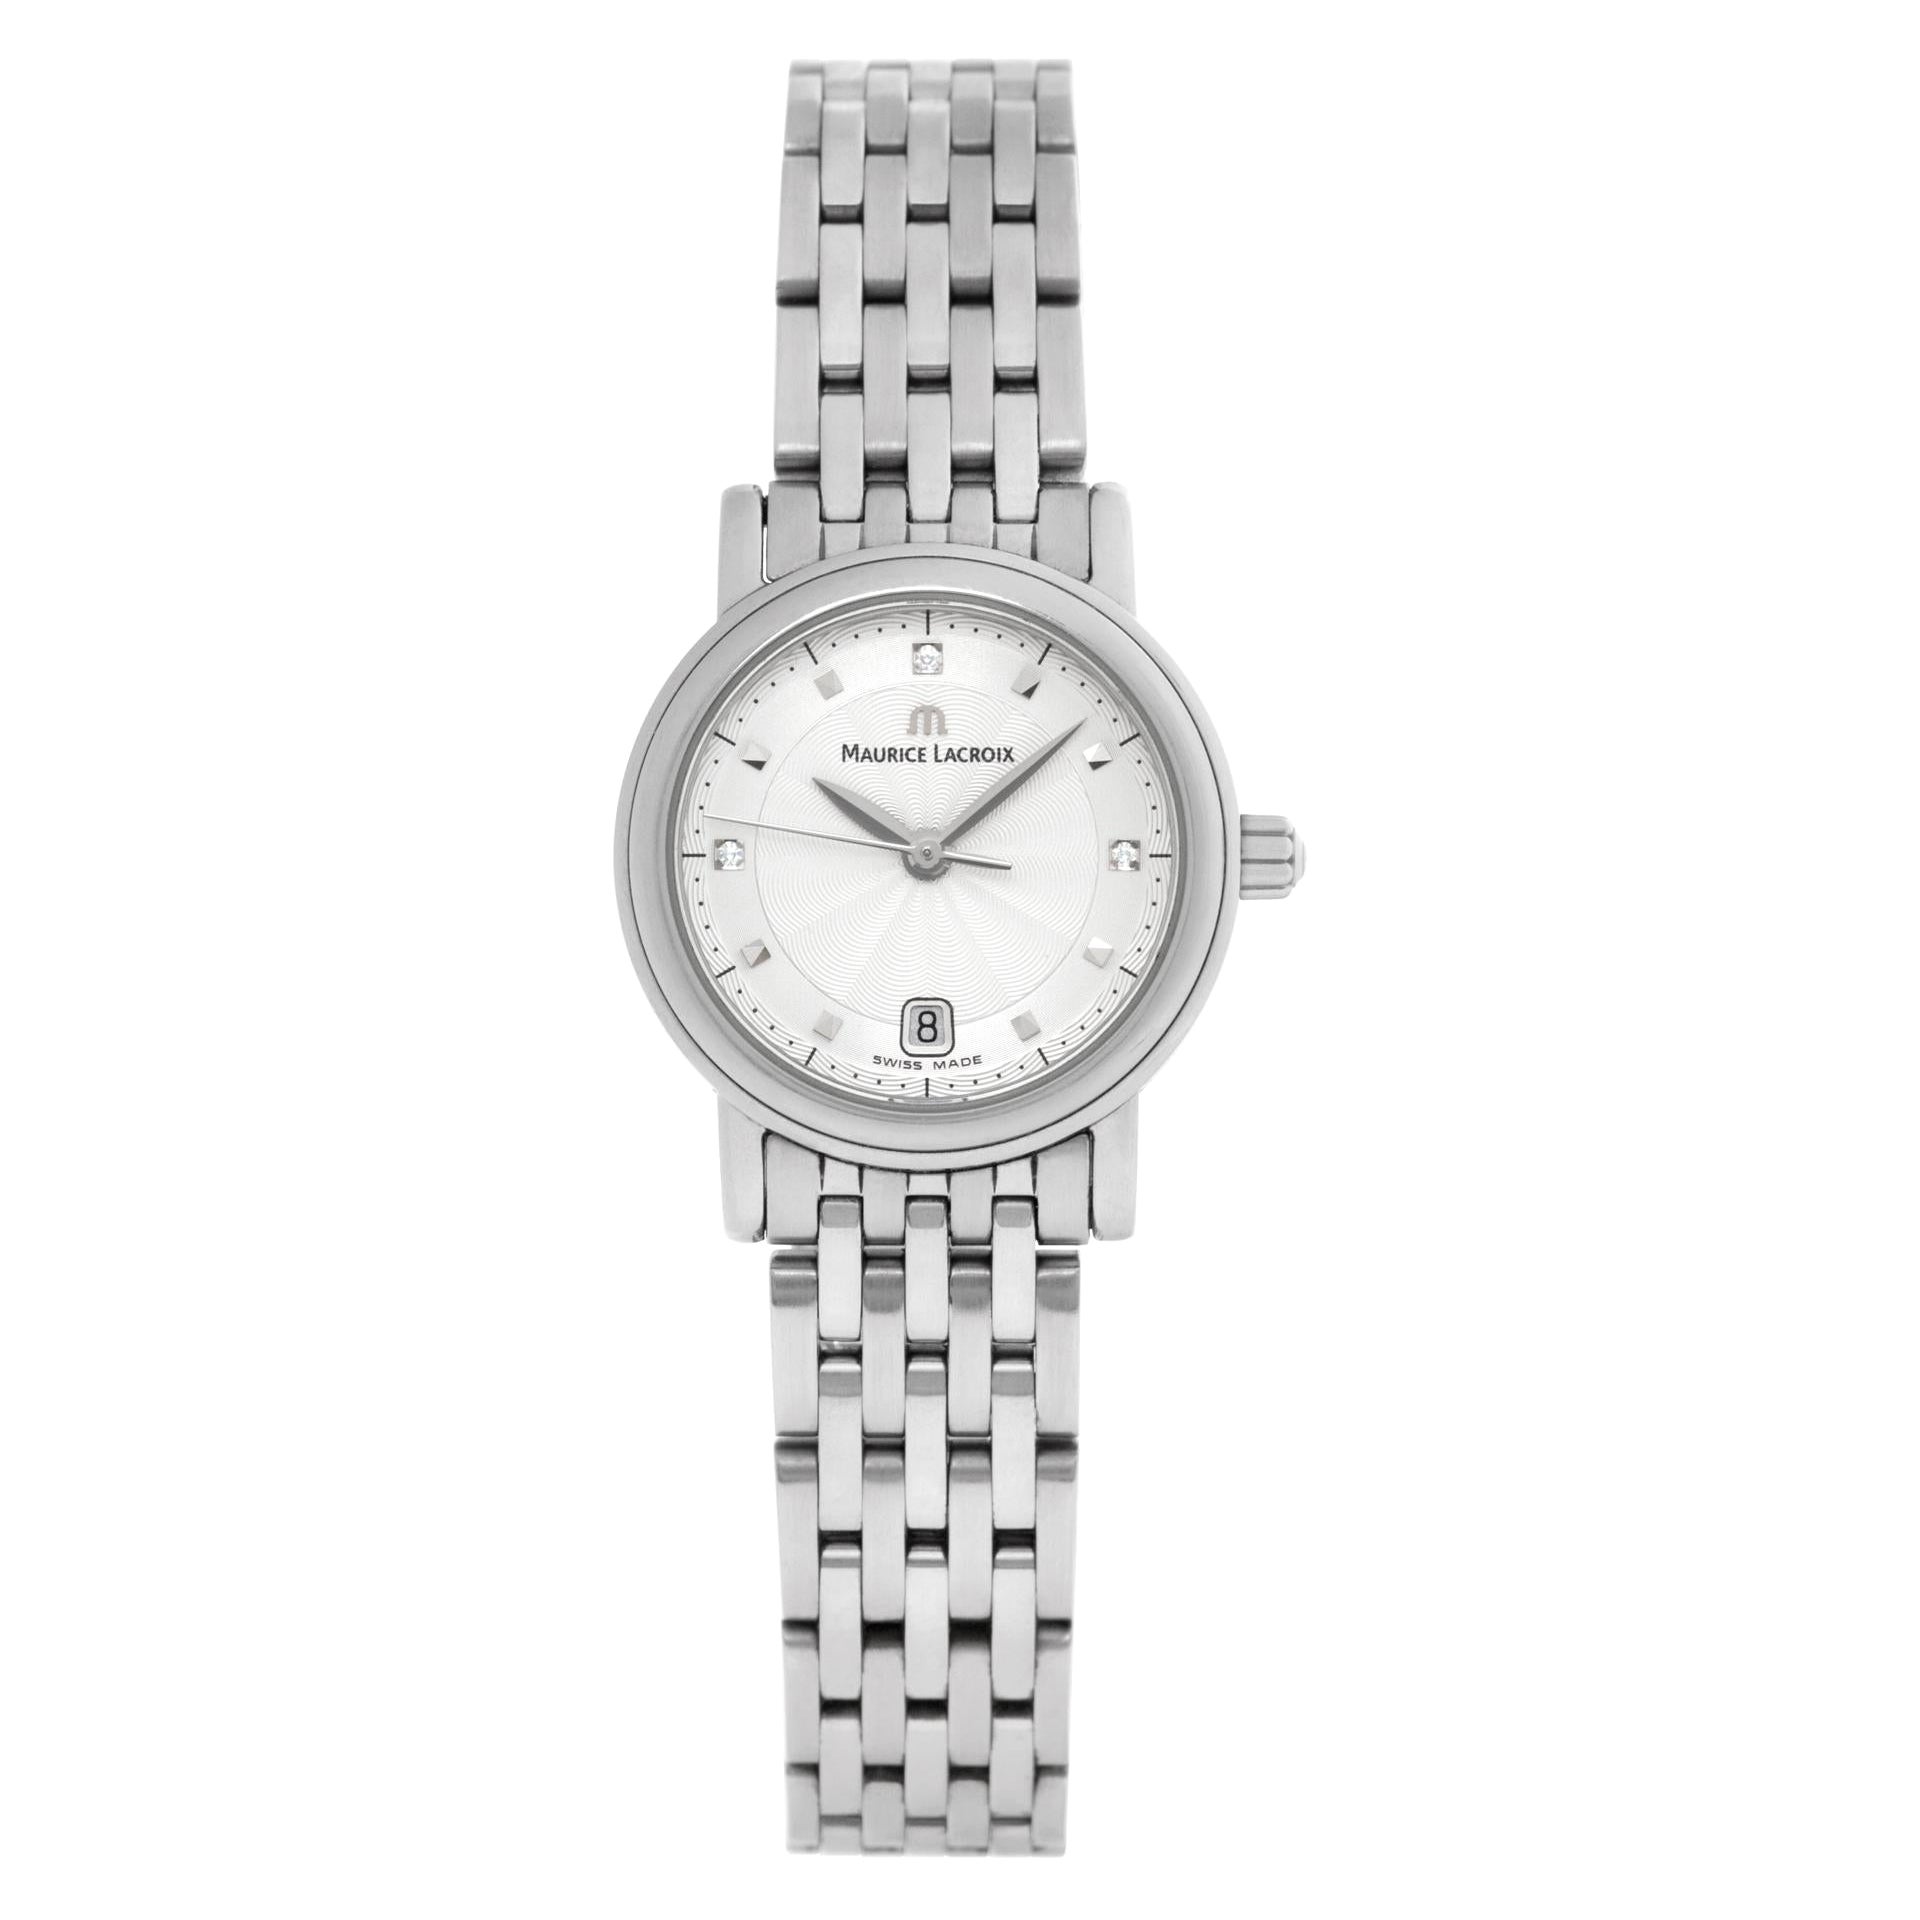 Maurice Lacroix Classic Watch Ref AI27582 Stainless Steel Case Quartz For Sale